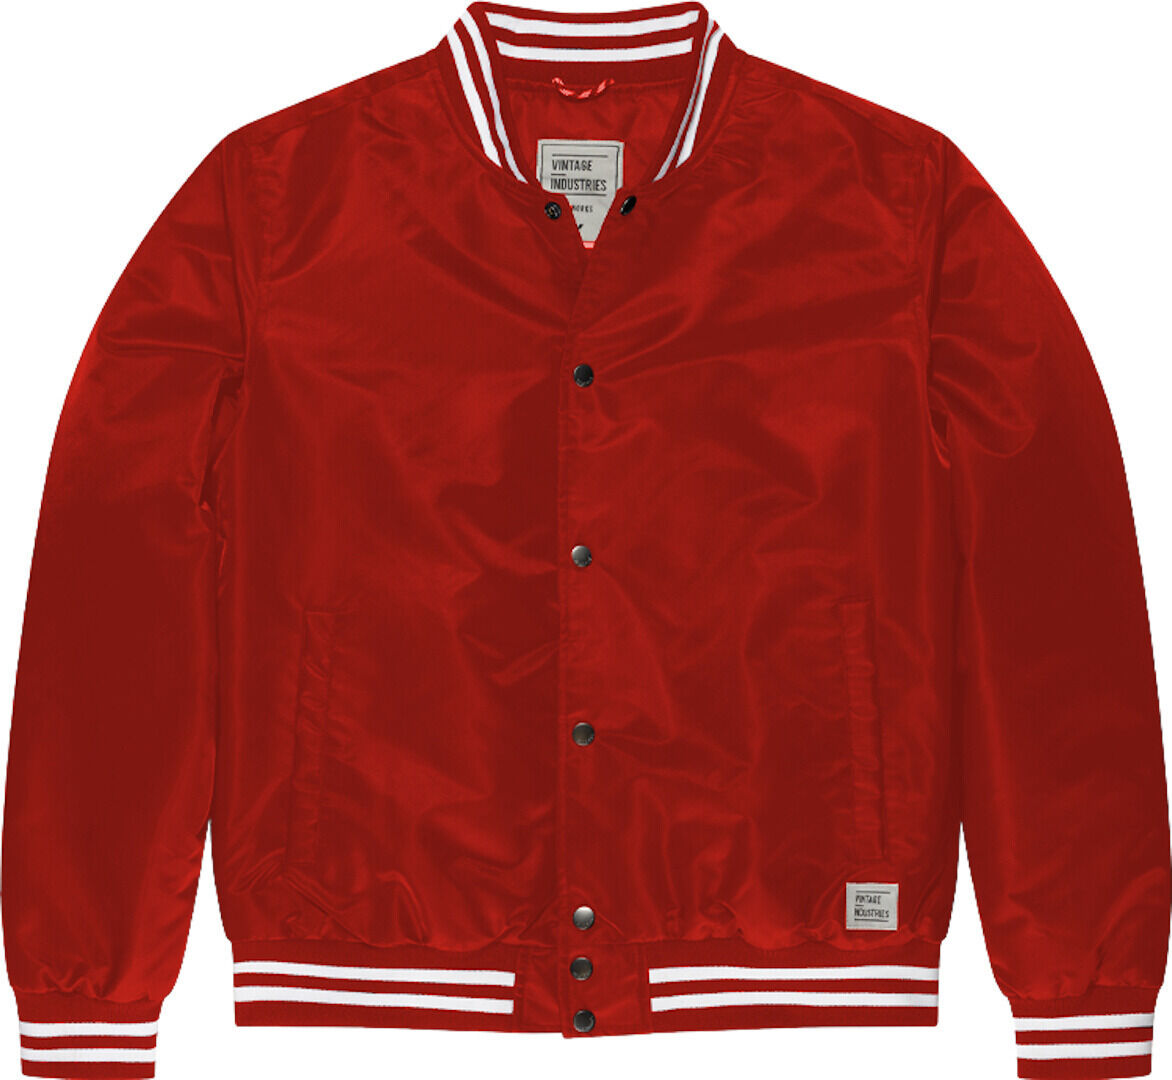 Vintage Industries Chapman Giacca Rosso XL